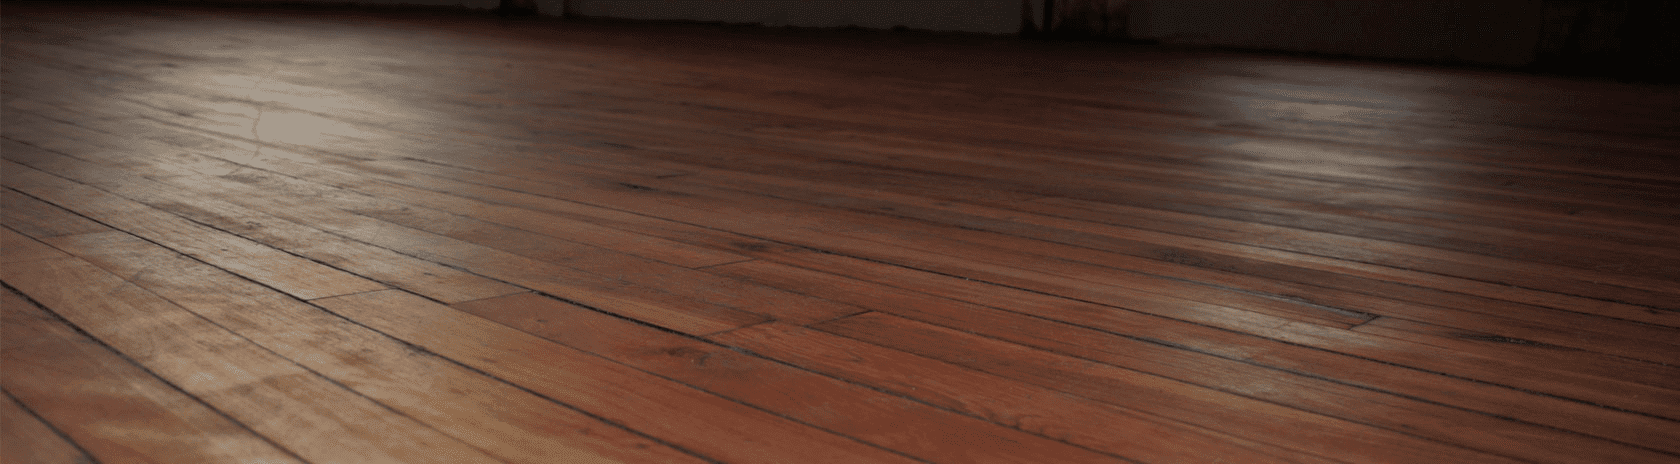 A photograph of the original wooden flooring at Factory163